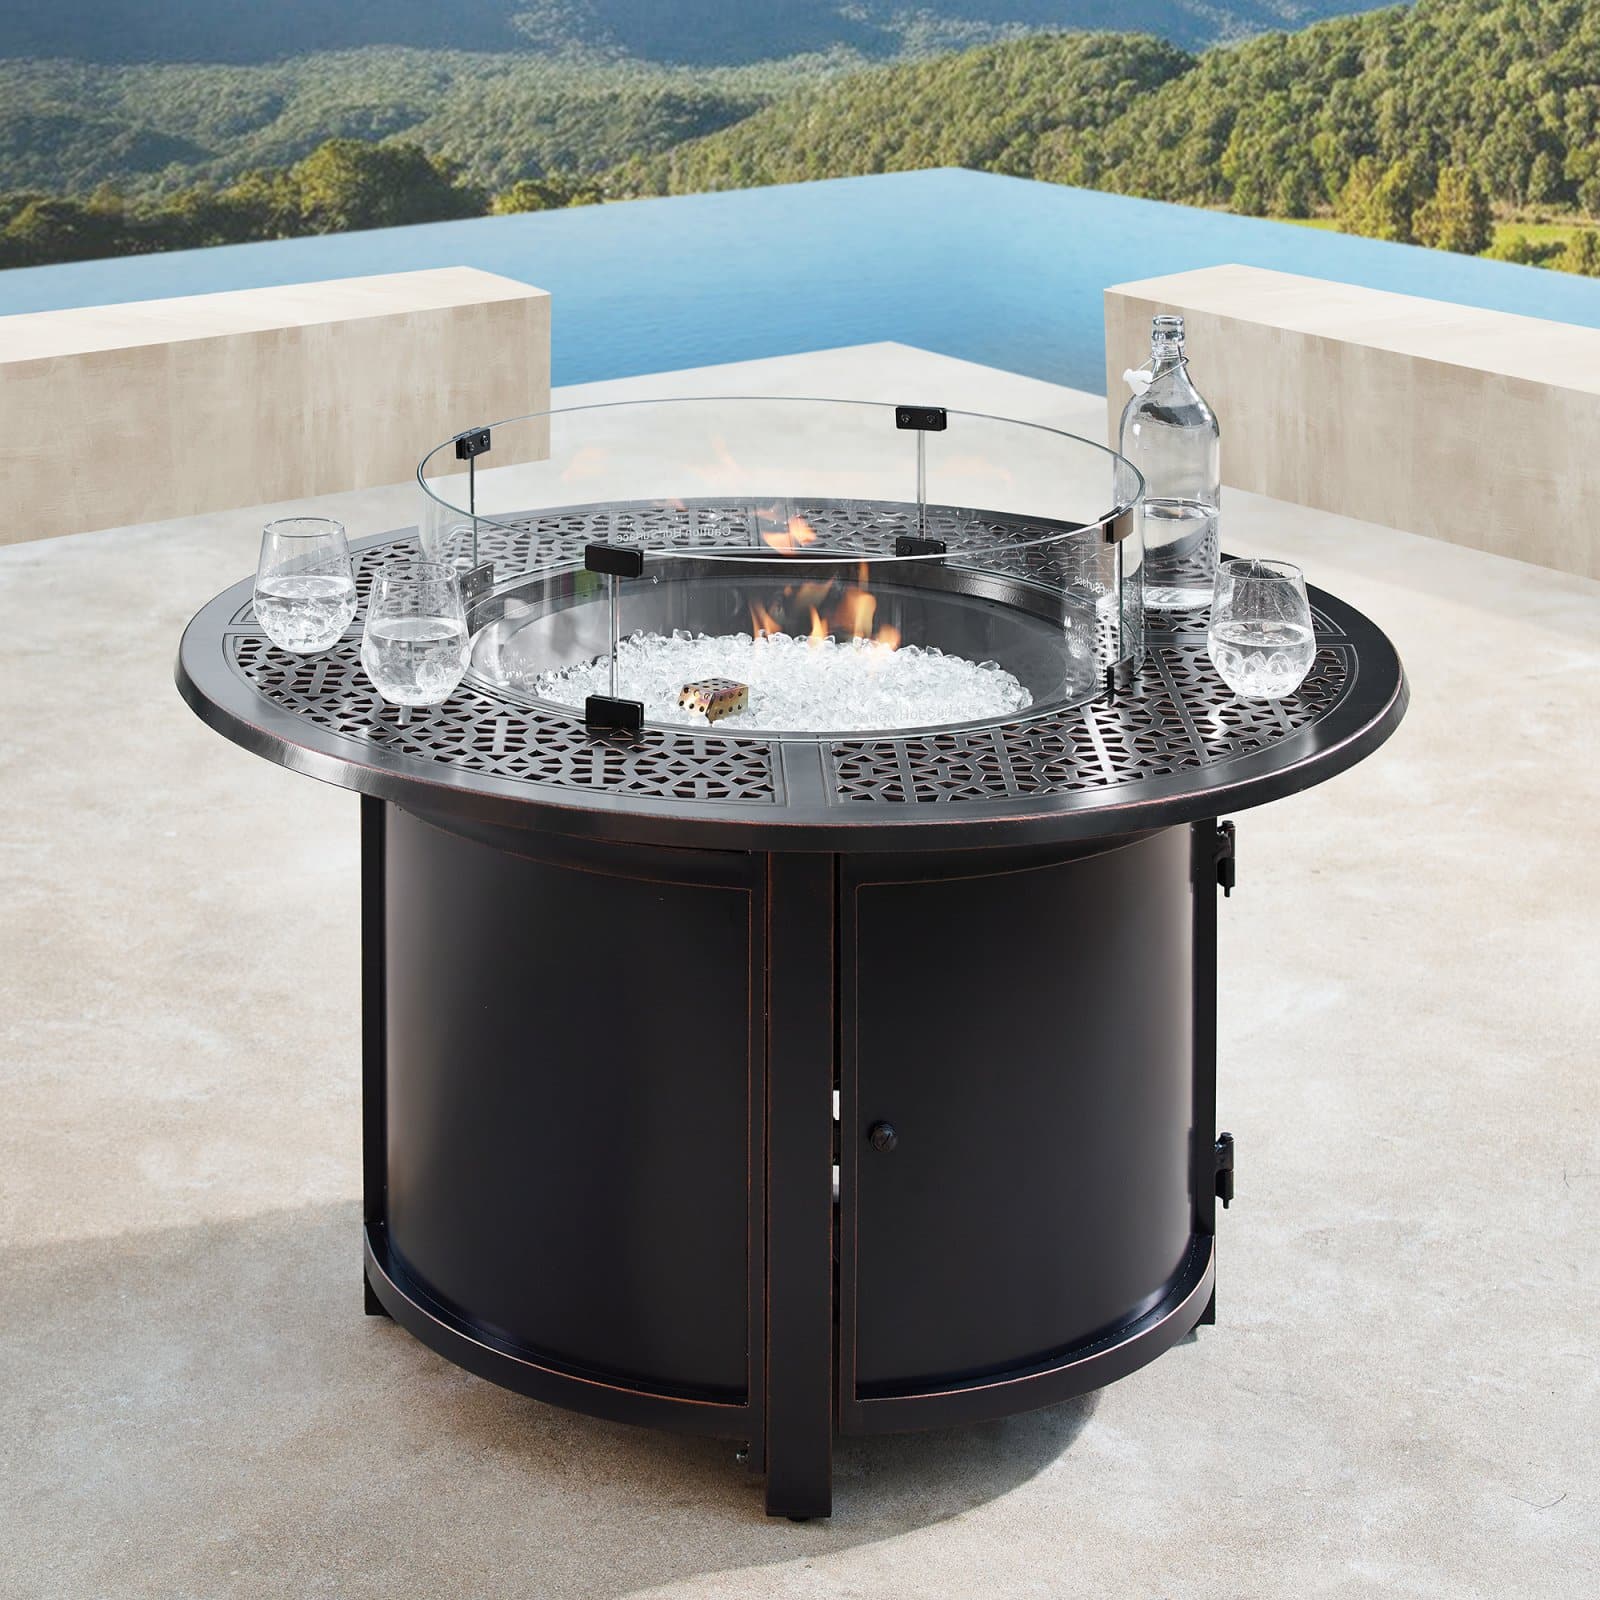 Oakland Living Dubai 44 in. Round Propane Fire Pit Table